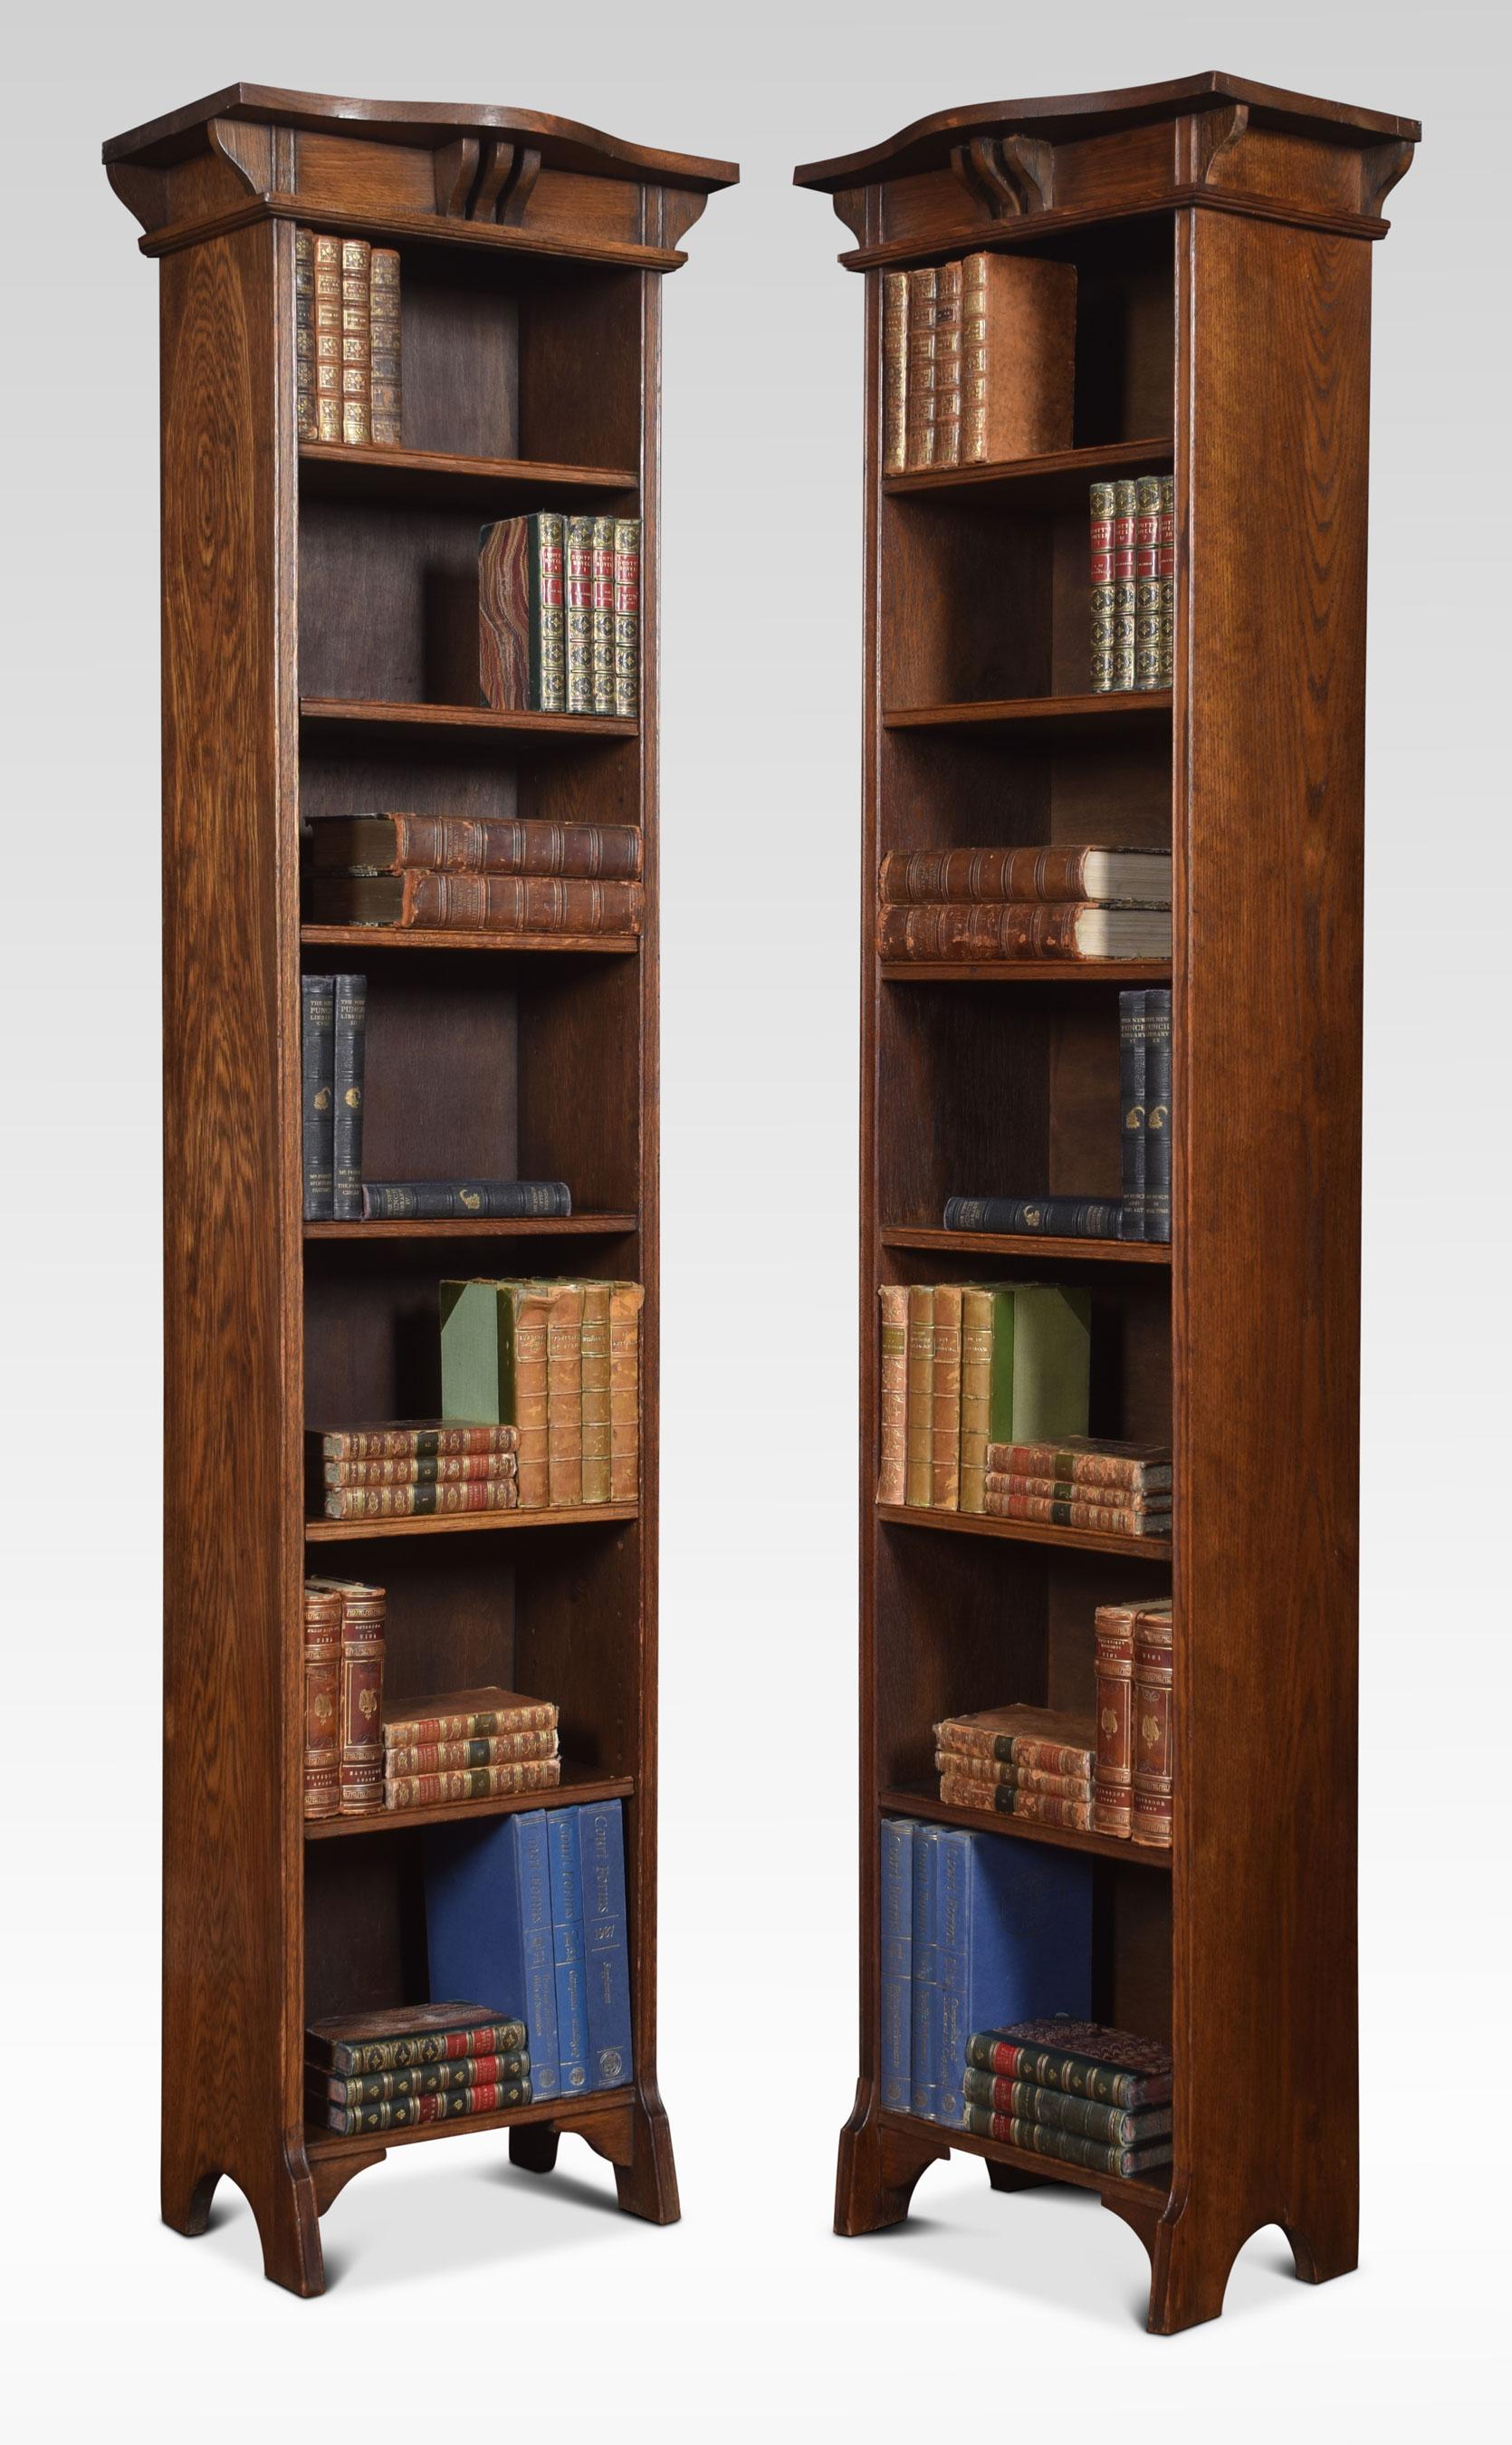 Pair of Arts & Crafts oak open narrow bookcases with serpentine canopy tops above shelved interior one bookcase having fully fixed shelves the other having fixed and adjustable shelves. All raised up on bracket feet.
Dimensions:
Height 71